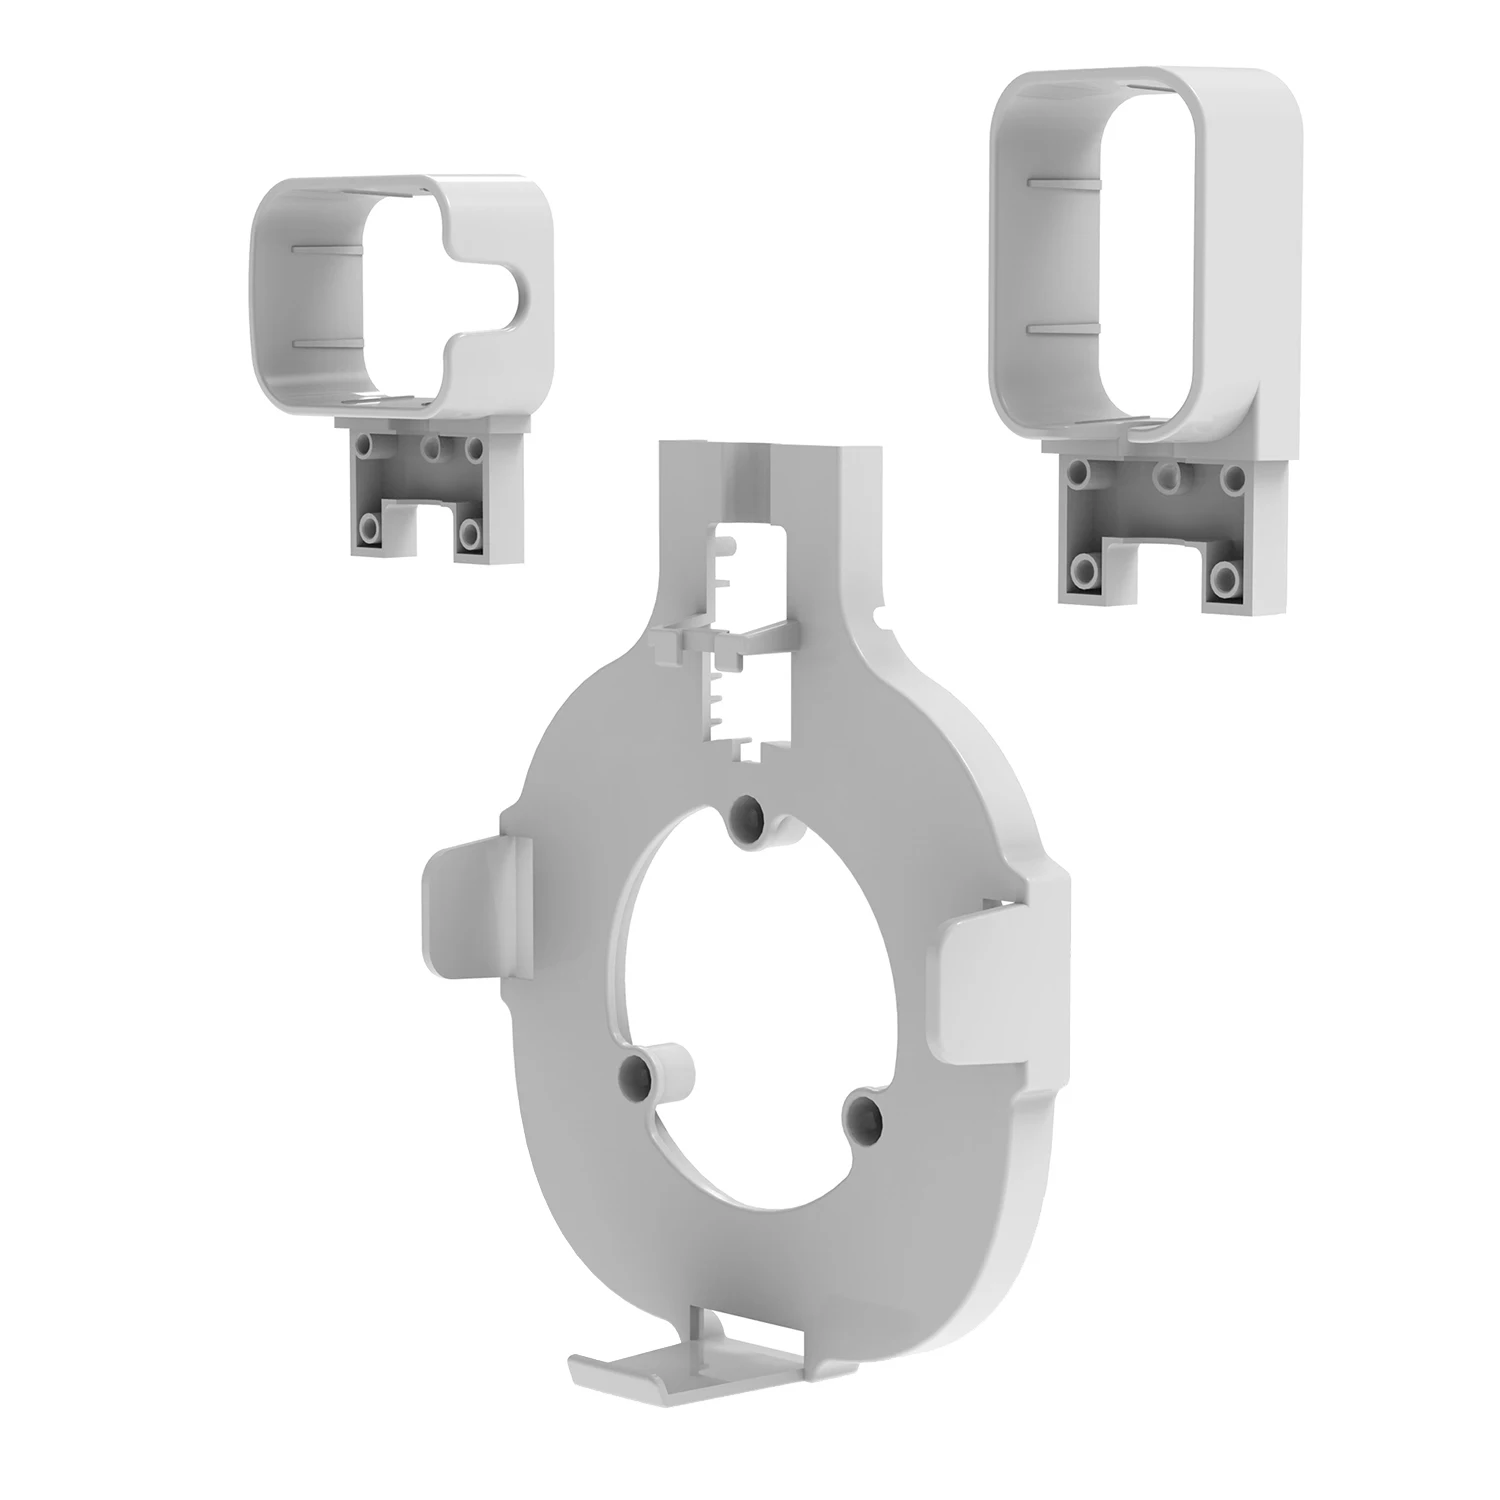 

Outlet Wall Mount Holder Stand for Pro 6 & Pro 6E Home WiFi Router, Supports Vertical or Horizontal Outlets